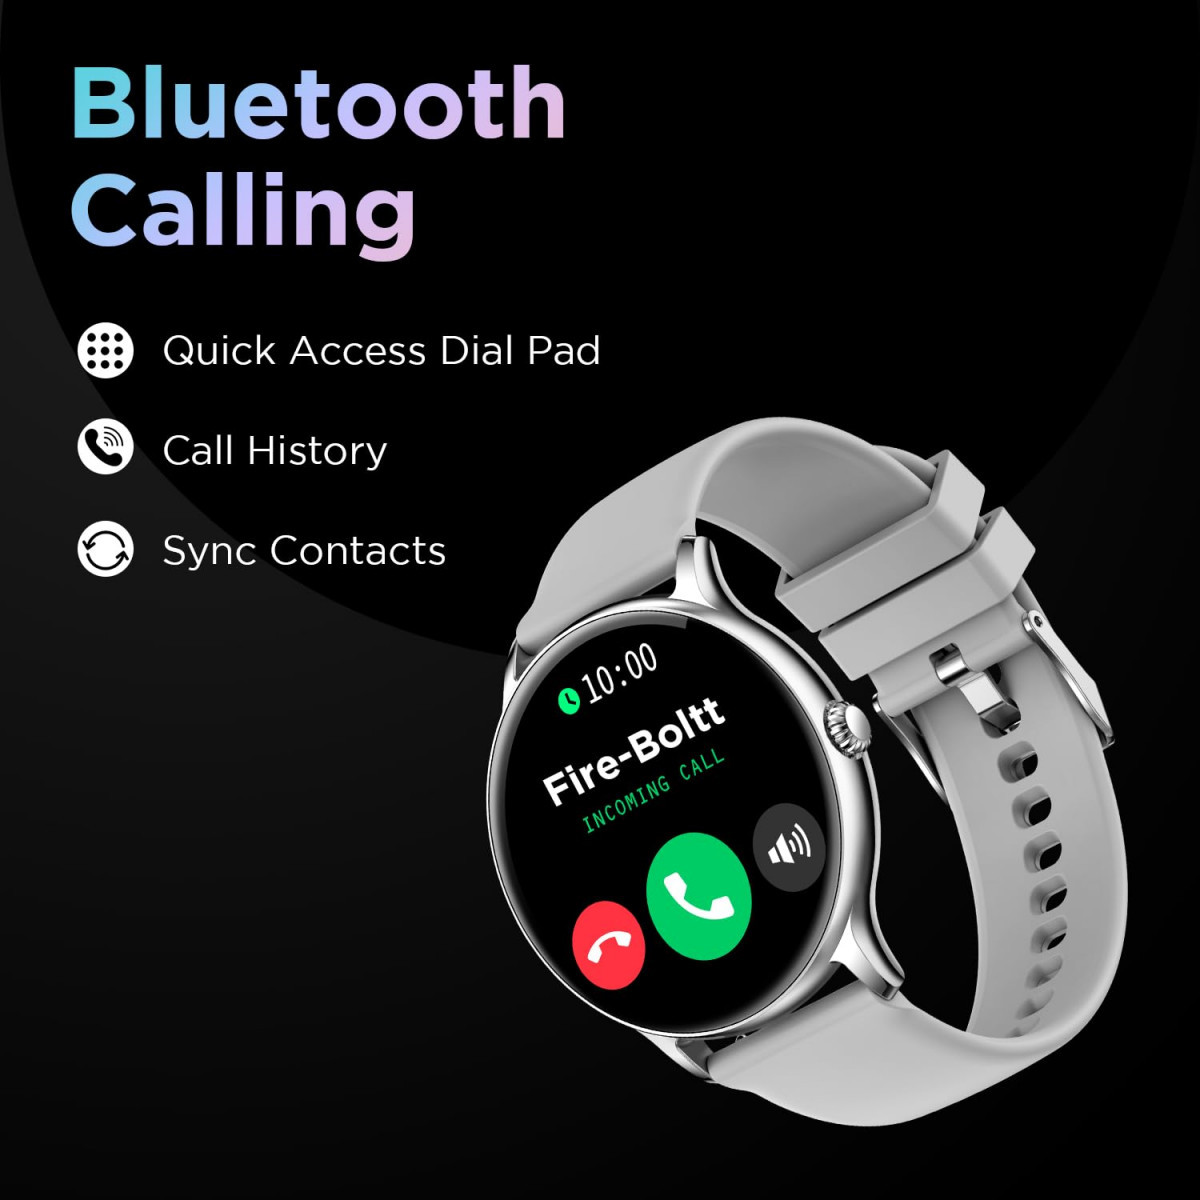 Fire-Boltt Phoenix Smart Watch with Bluetooth Calling 13120 Sports Modes 240  240 PX High Res with SpO2